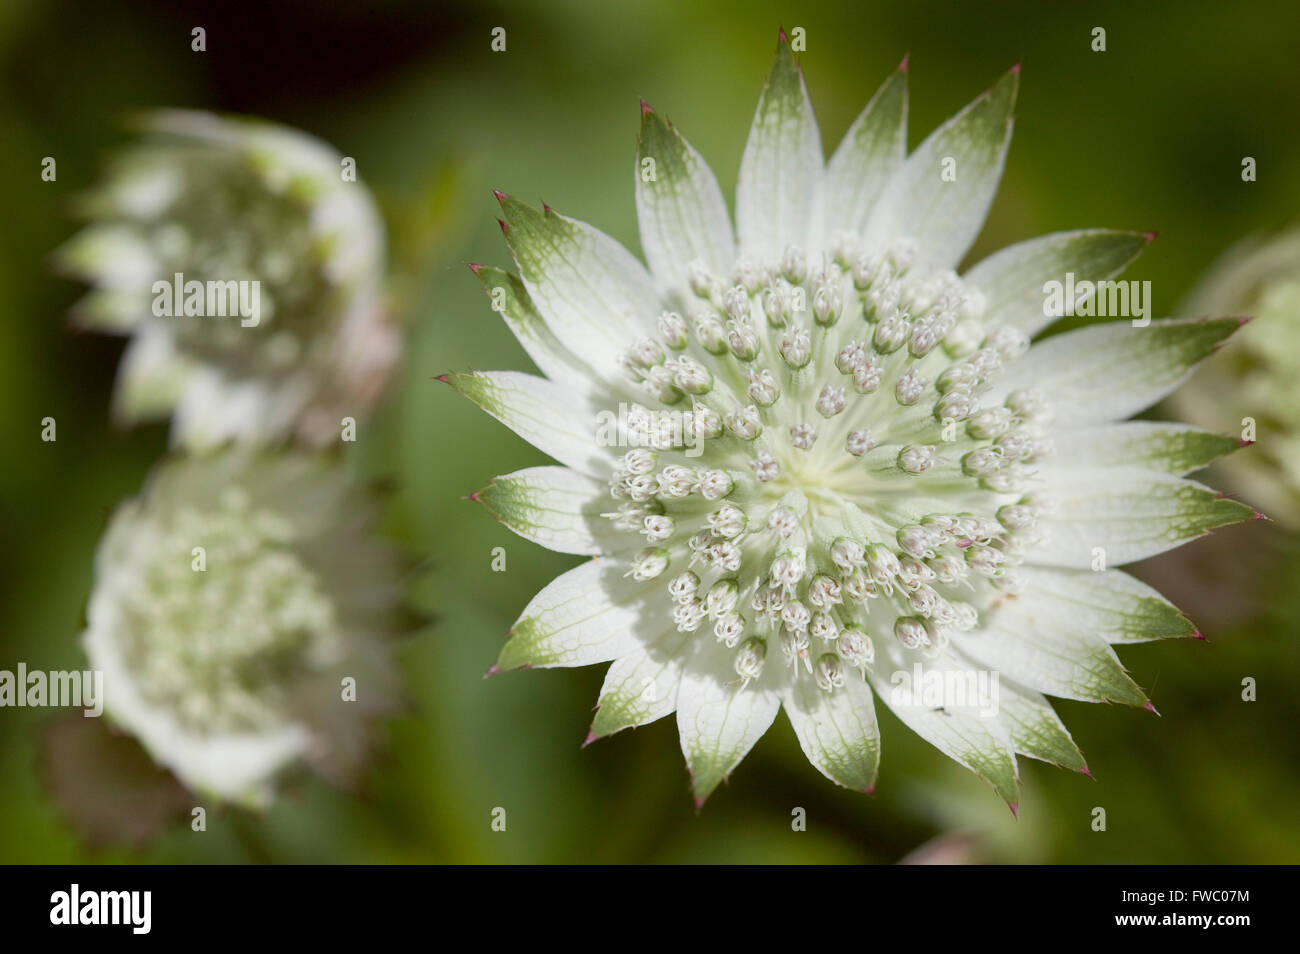 Close up detail of the plant Astrantia 'Shaggy' also known as 'Margery Fish'. Stock Photo